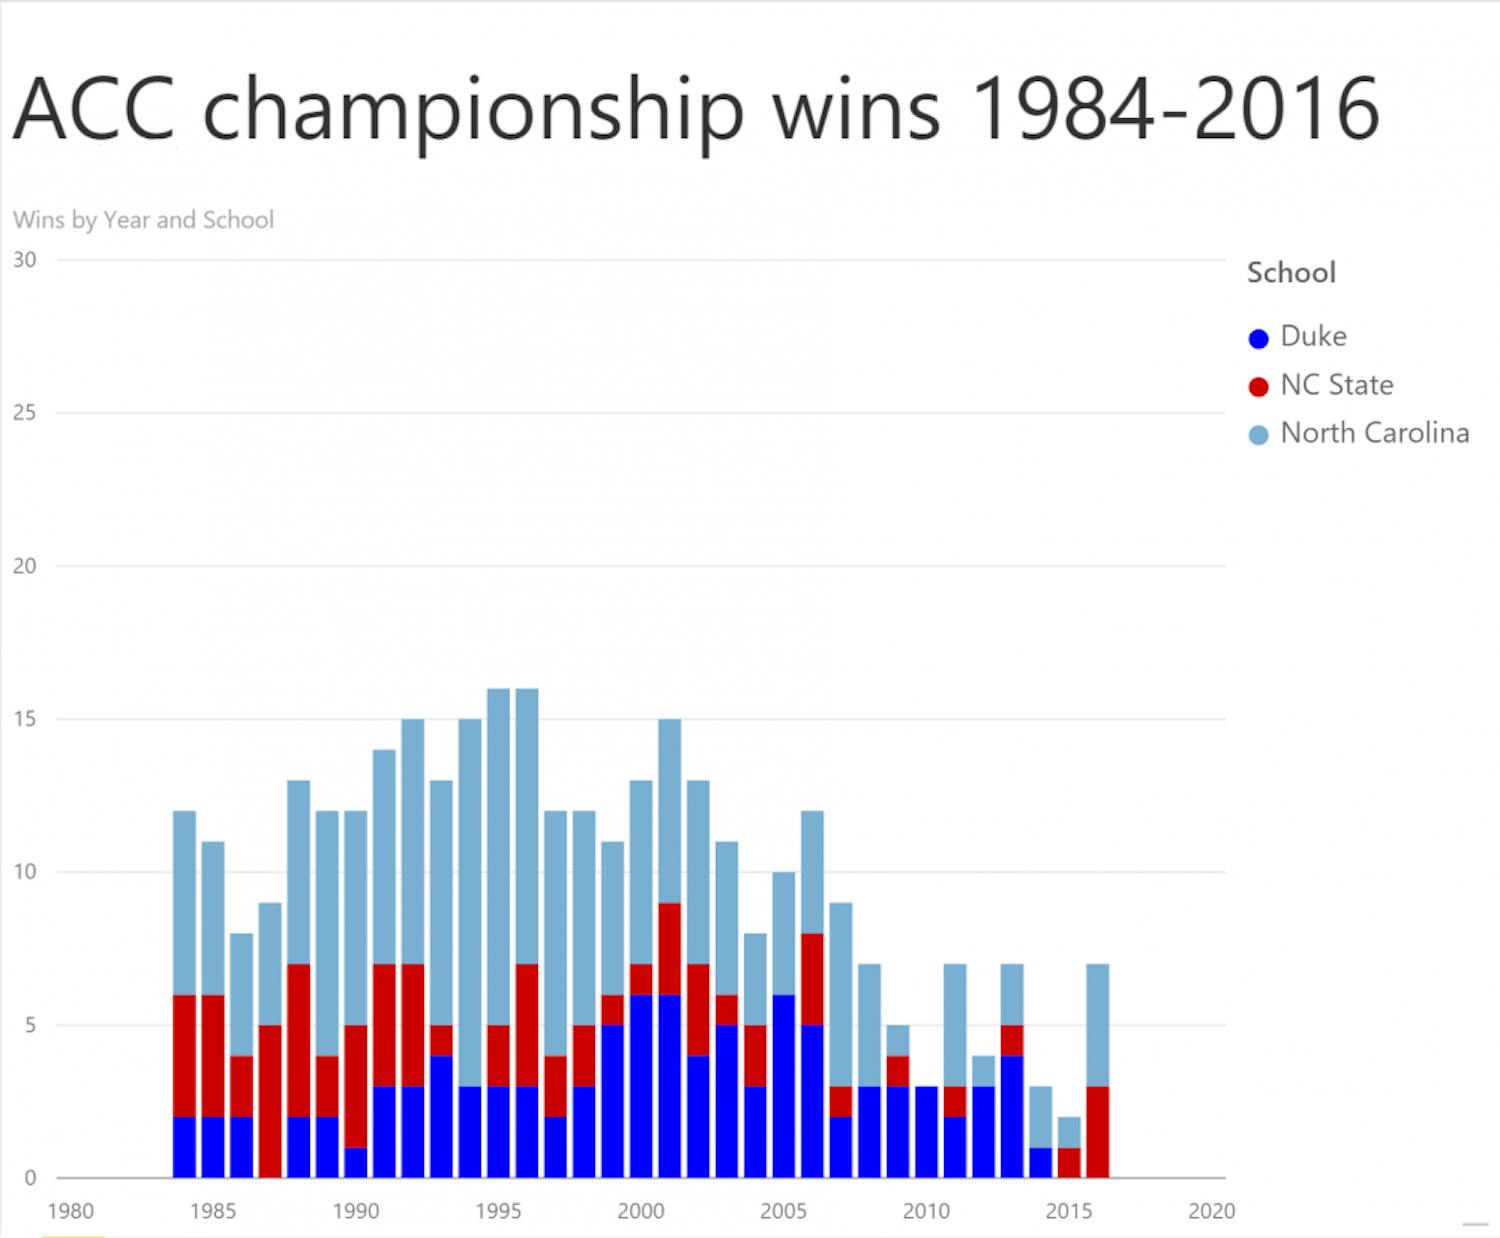 ACC expansion is one of the main reasons it has become harder for Duke to consistently generate as many&nbsp;ACC championships and NCAA tournament berths in recent years.